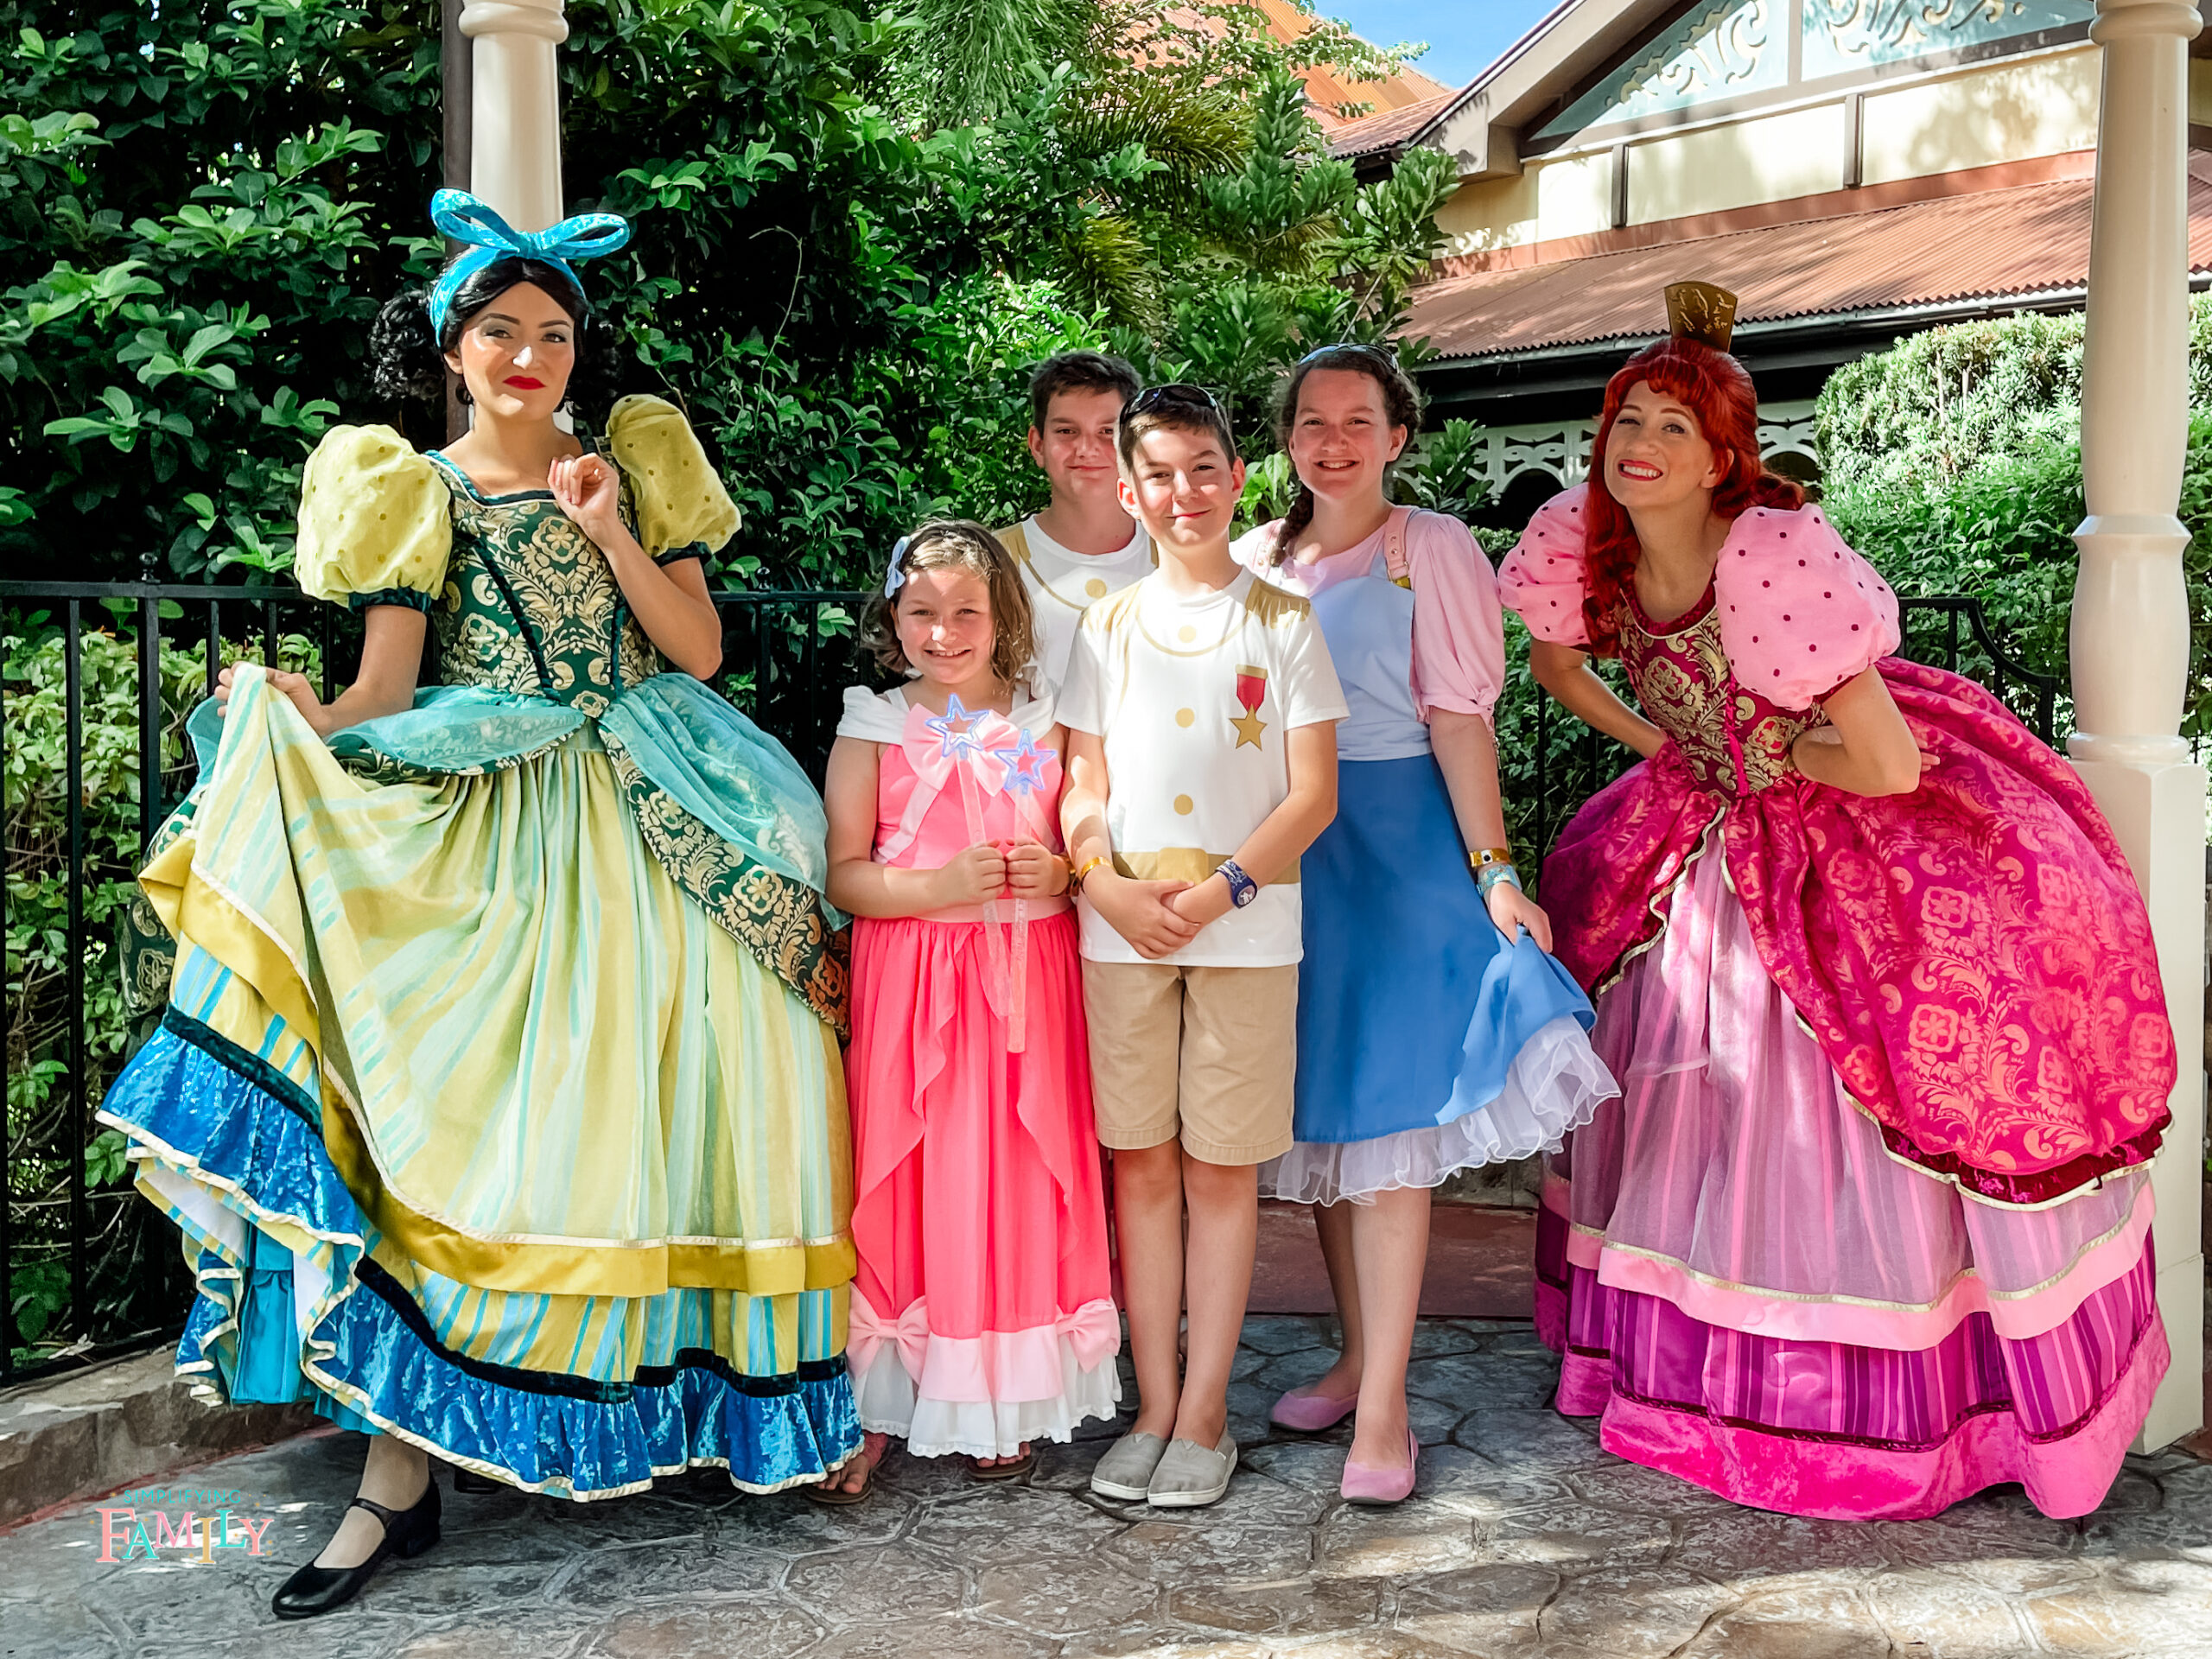 Where Can You Find Princesses at Magic Kingdom? Including 4 Most Popular Princesses